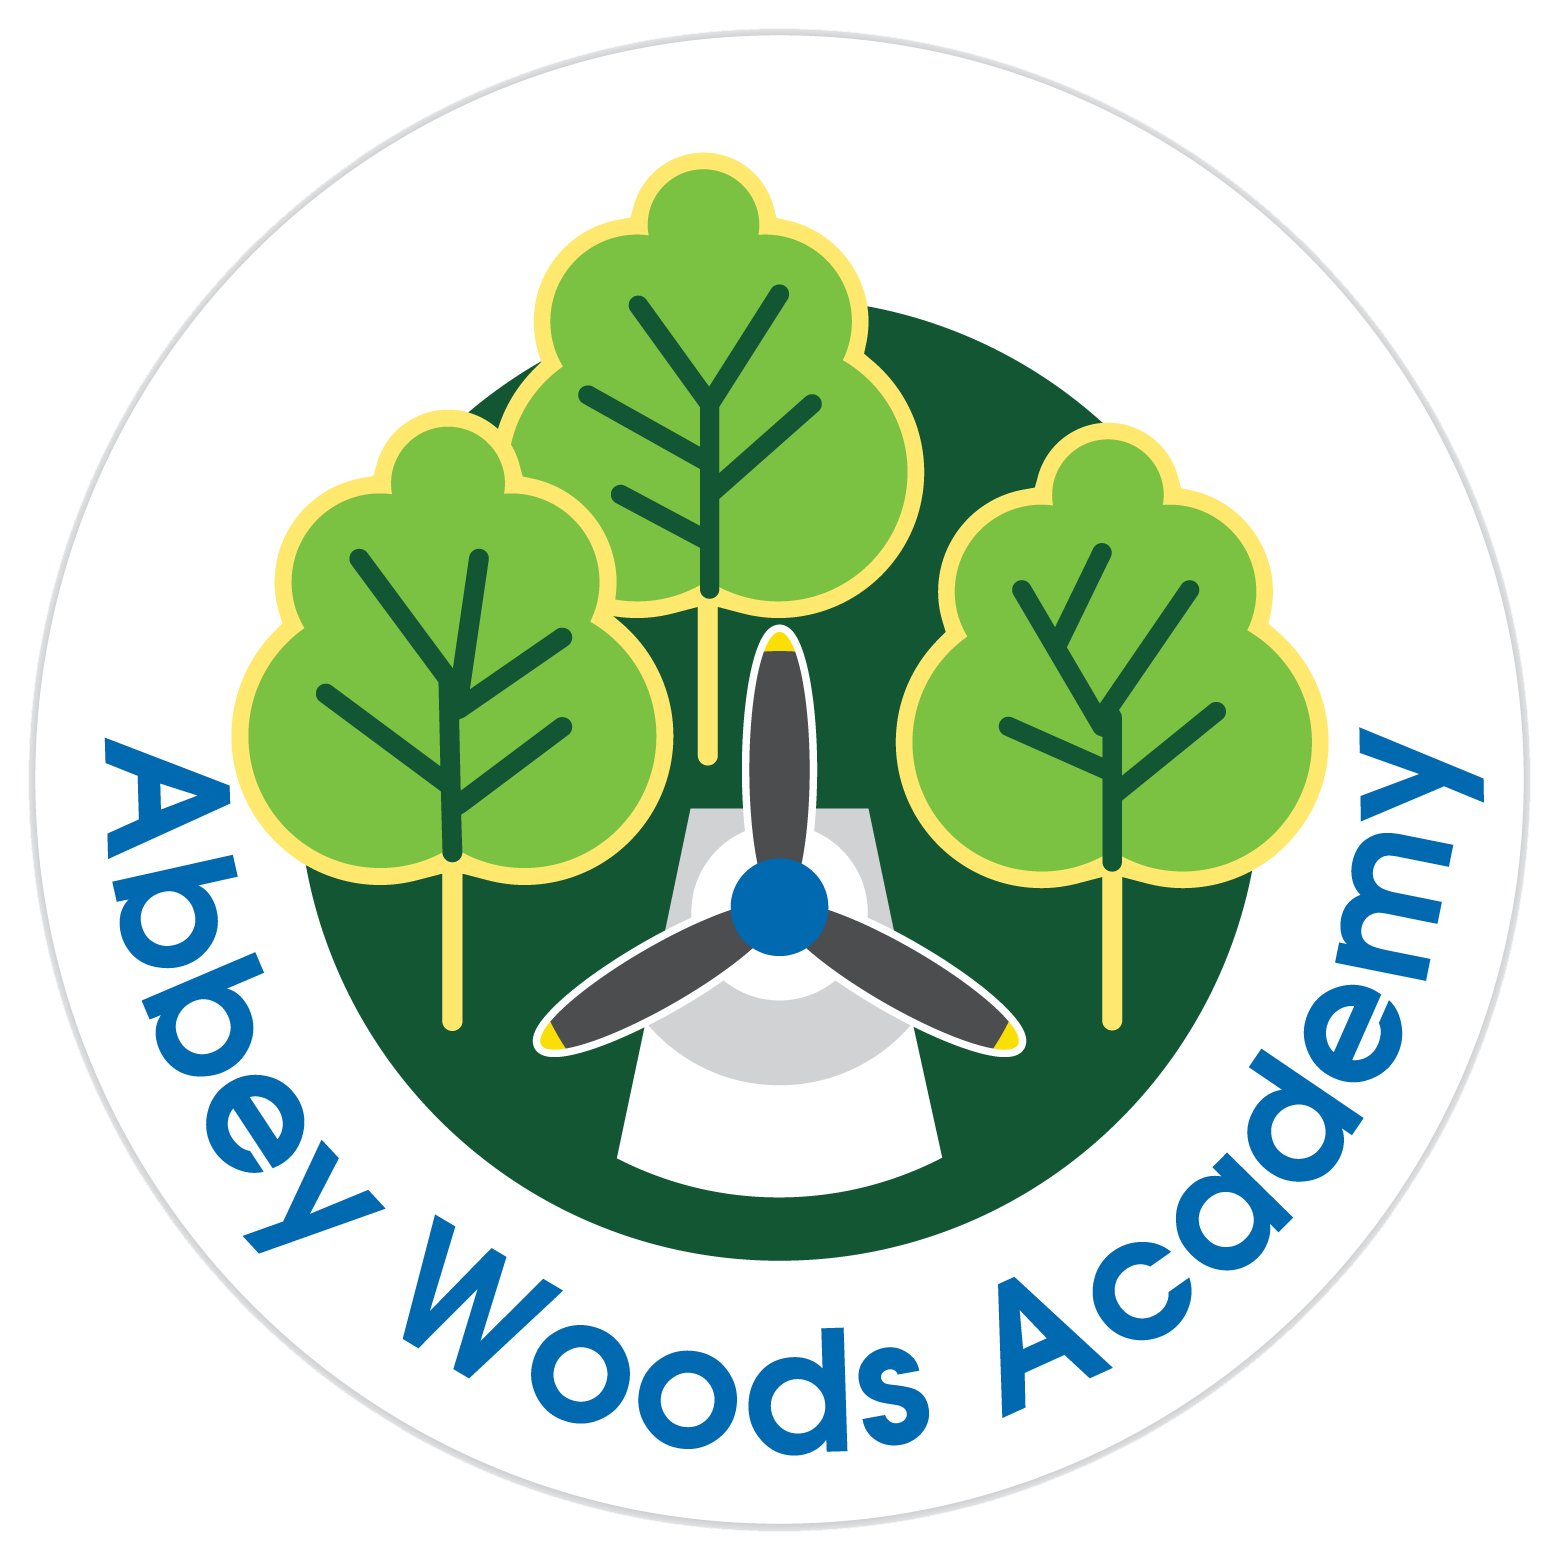 Abbey Woods Academy name